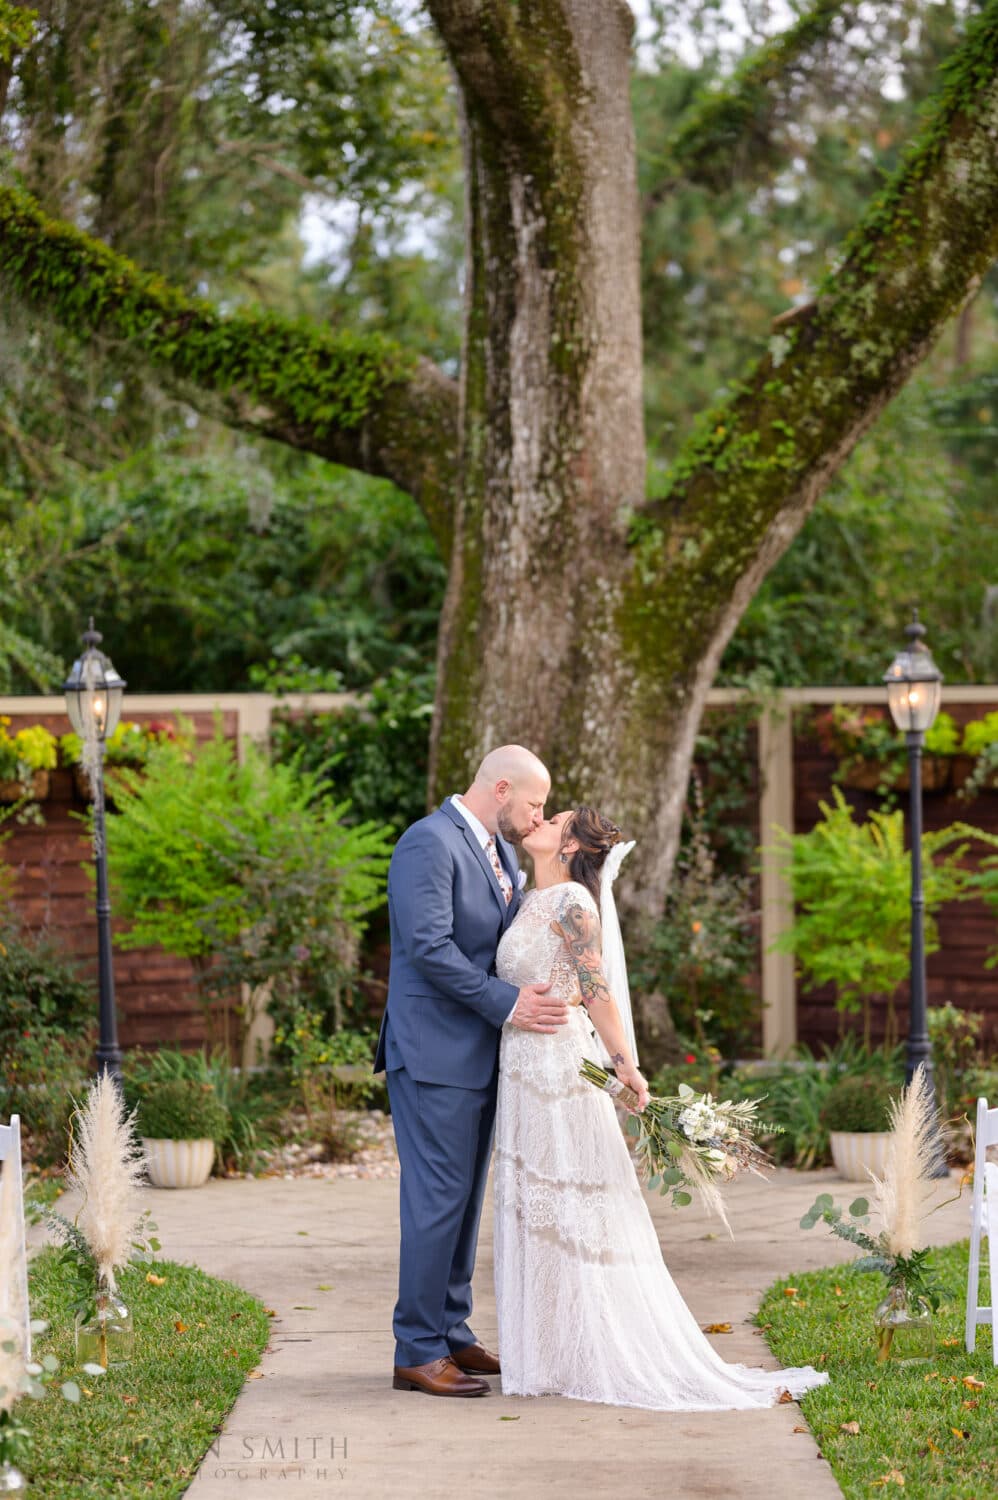 Kiss under the oak - The Cooper House